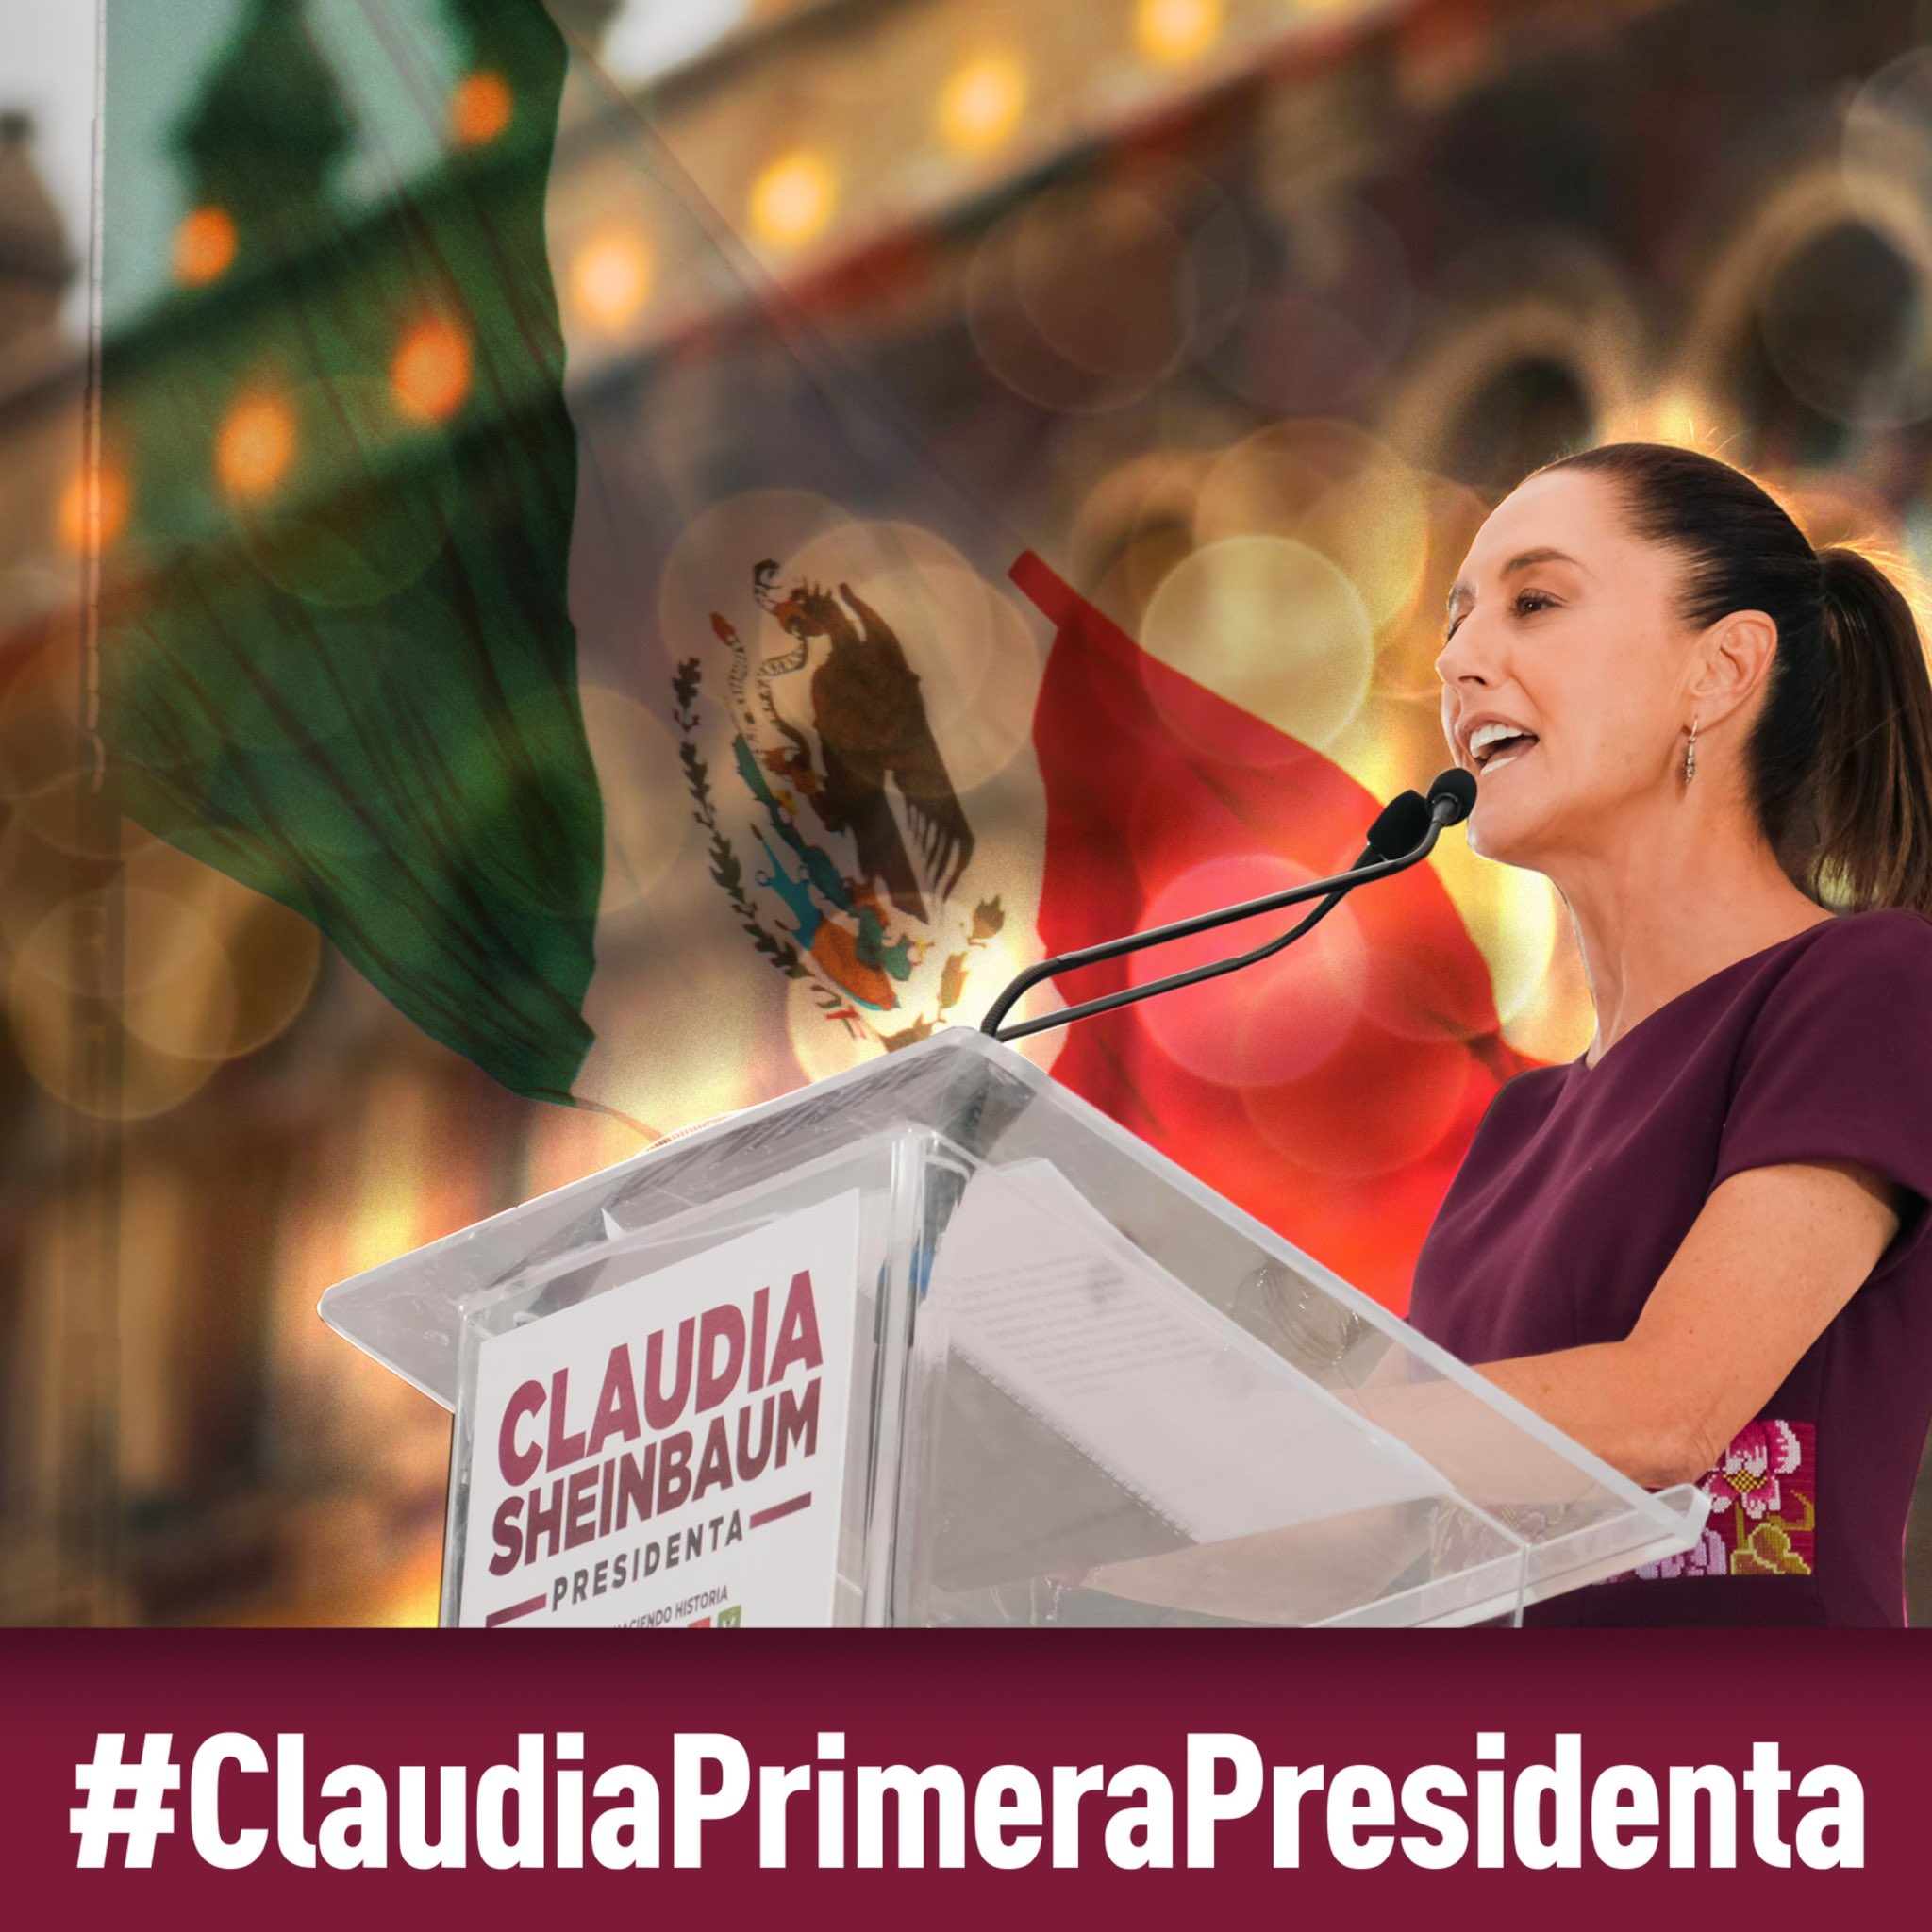 Claudia Sheinbaum’s Historic Victory and the Significance for Women in Mexican Politics